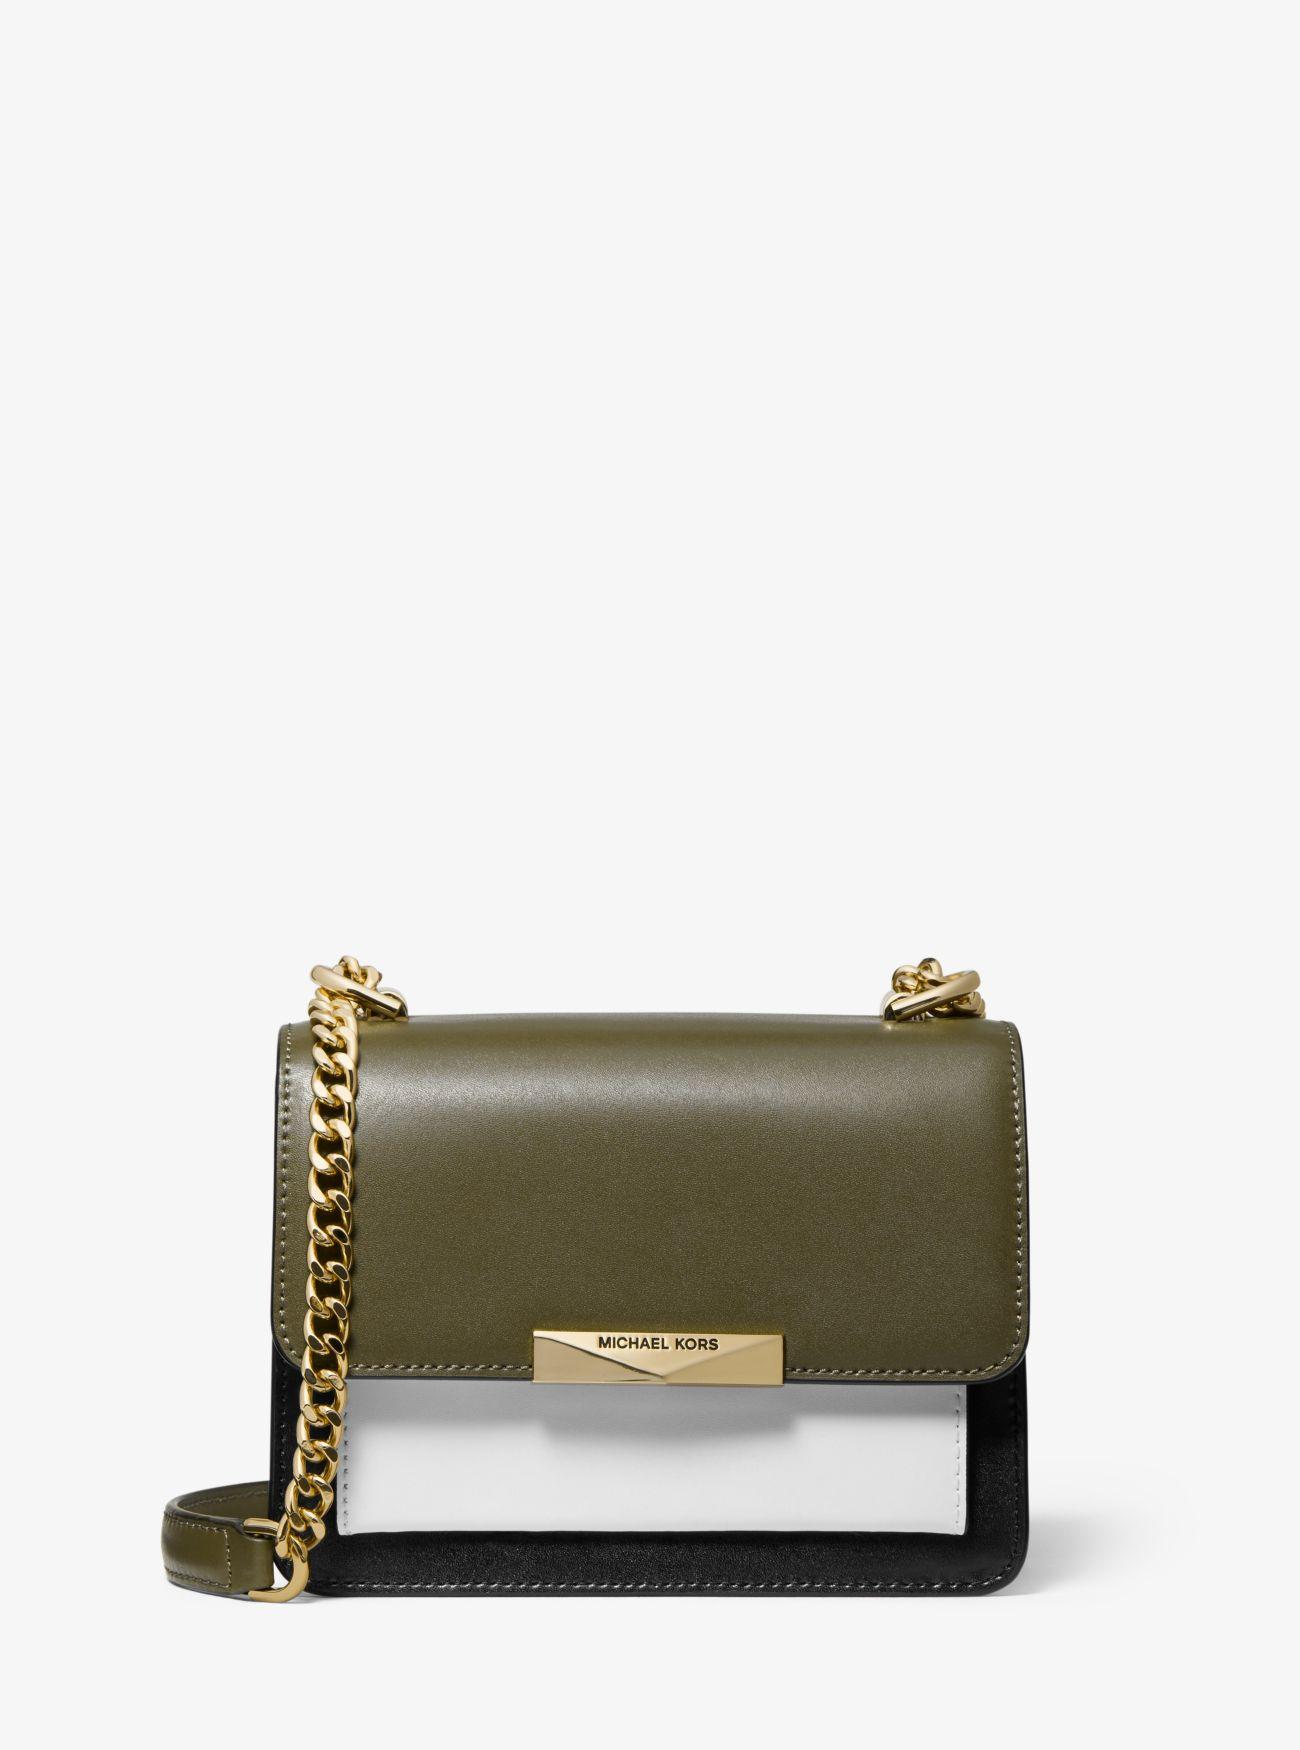 Lyst - Michael Kors Jade Extra-small Tri-color Leather Crossbody Bag